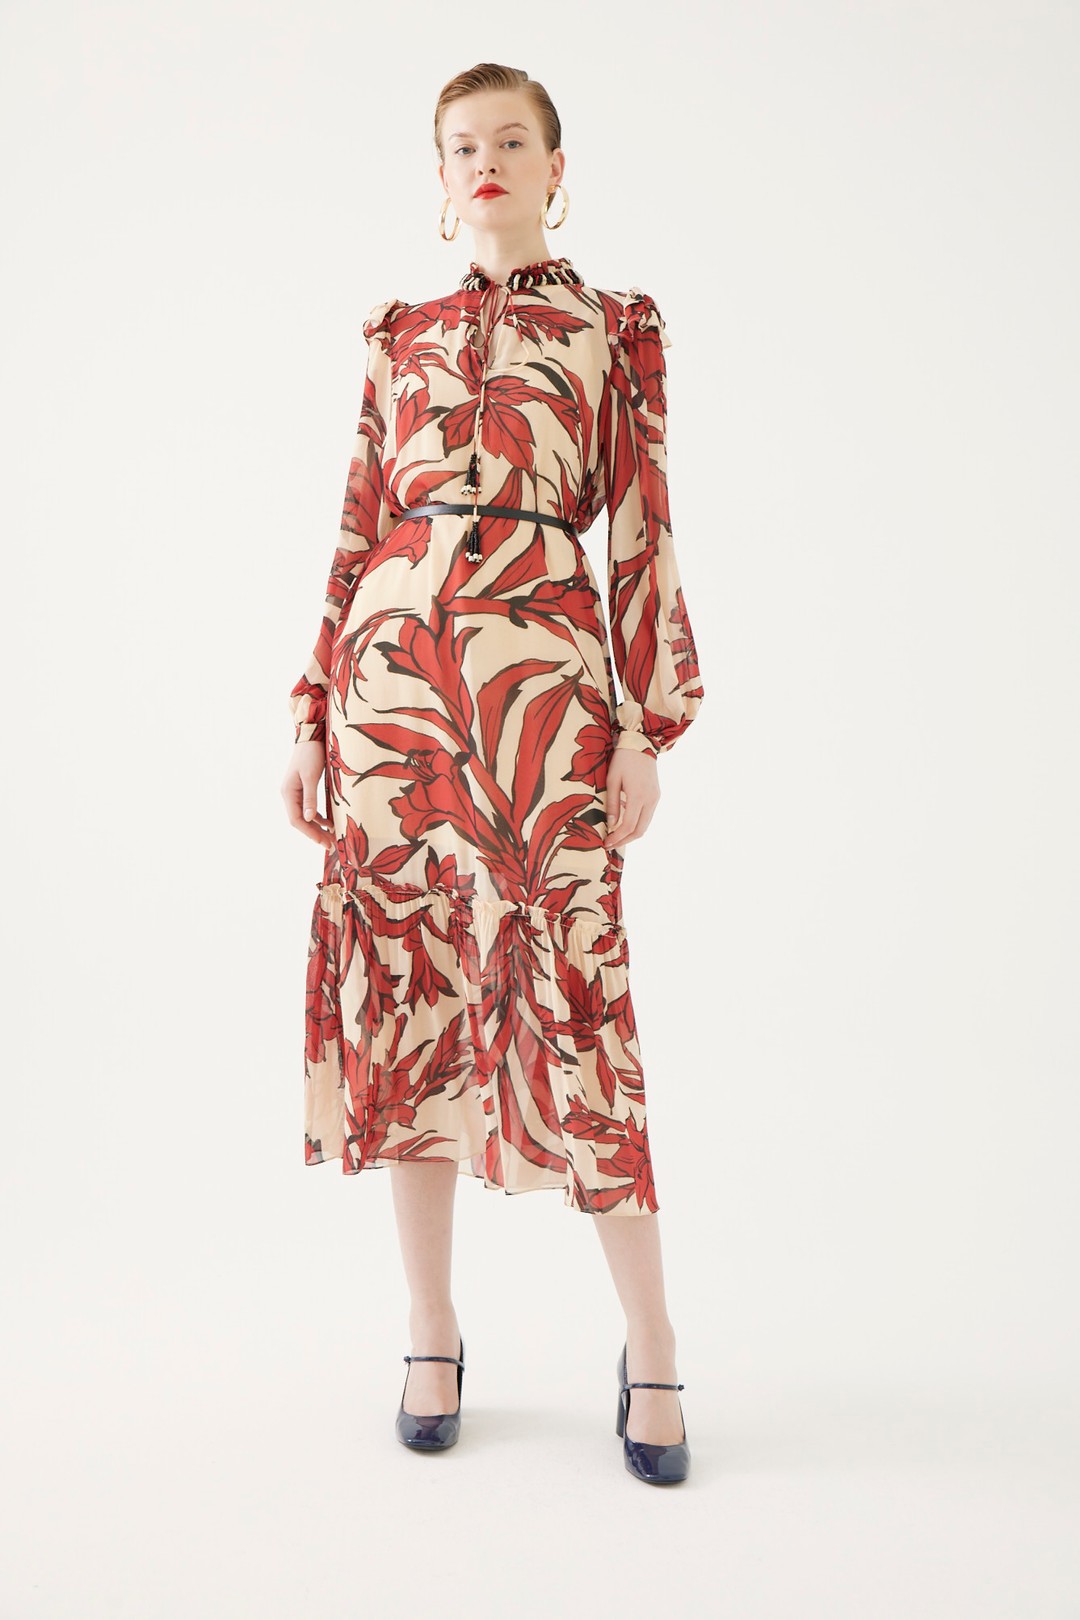 Floral Patterned Dress with Tie Detail on the Collar 1